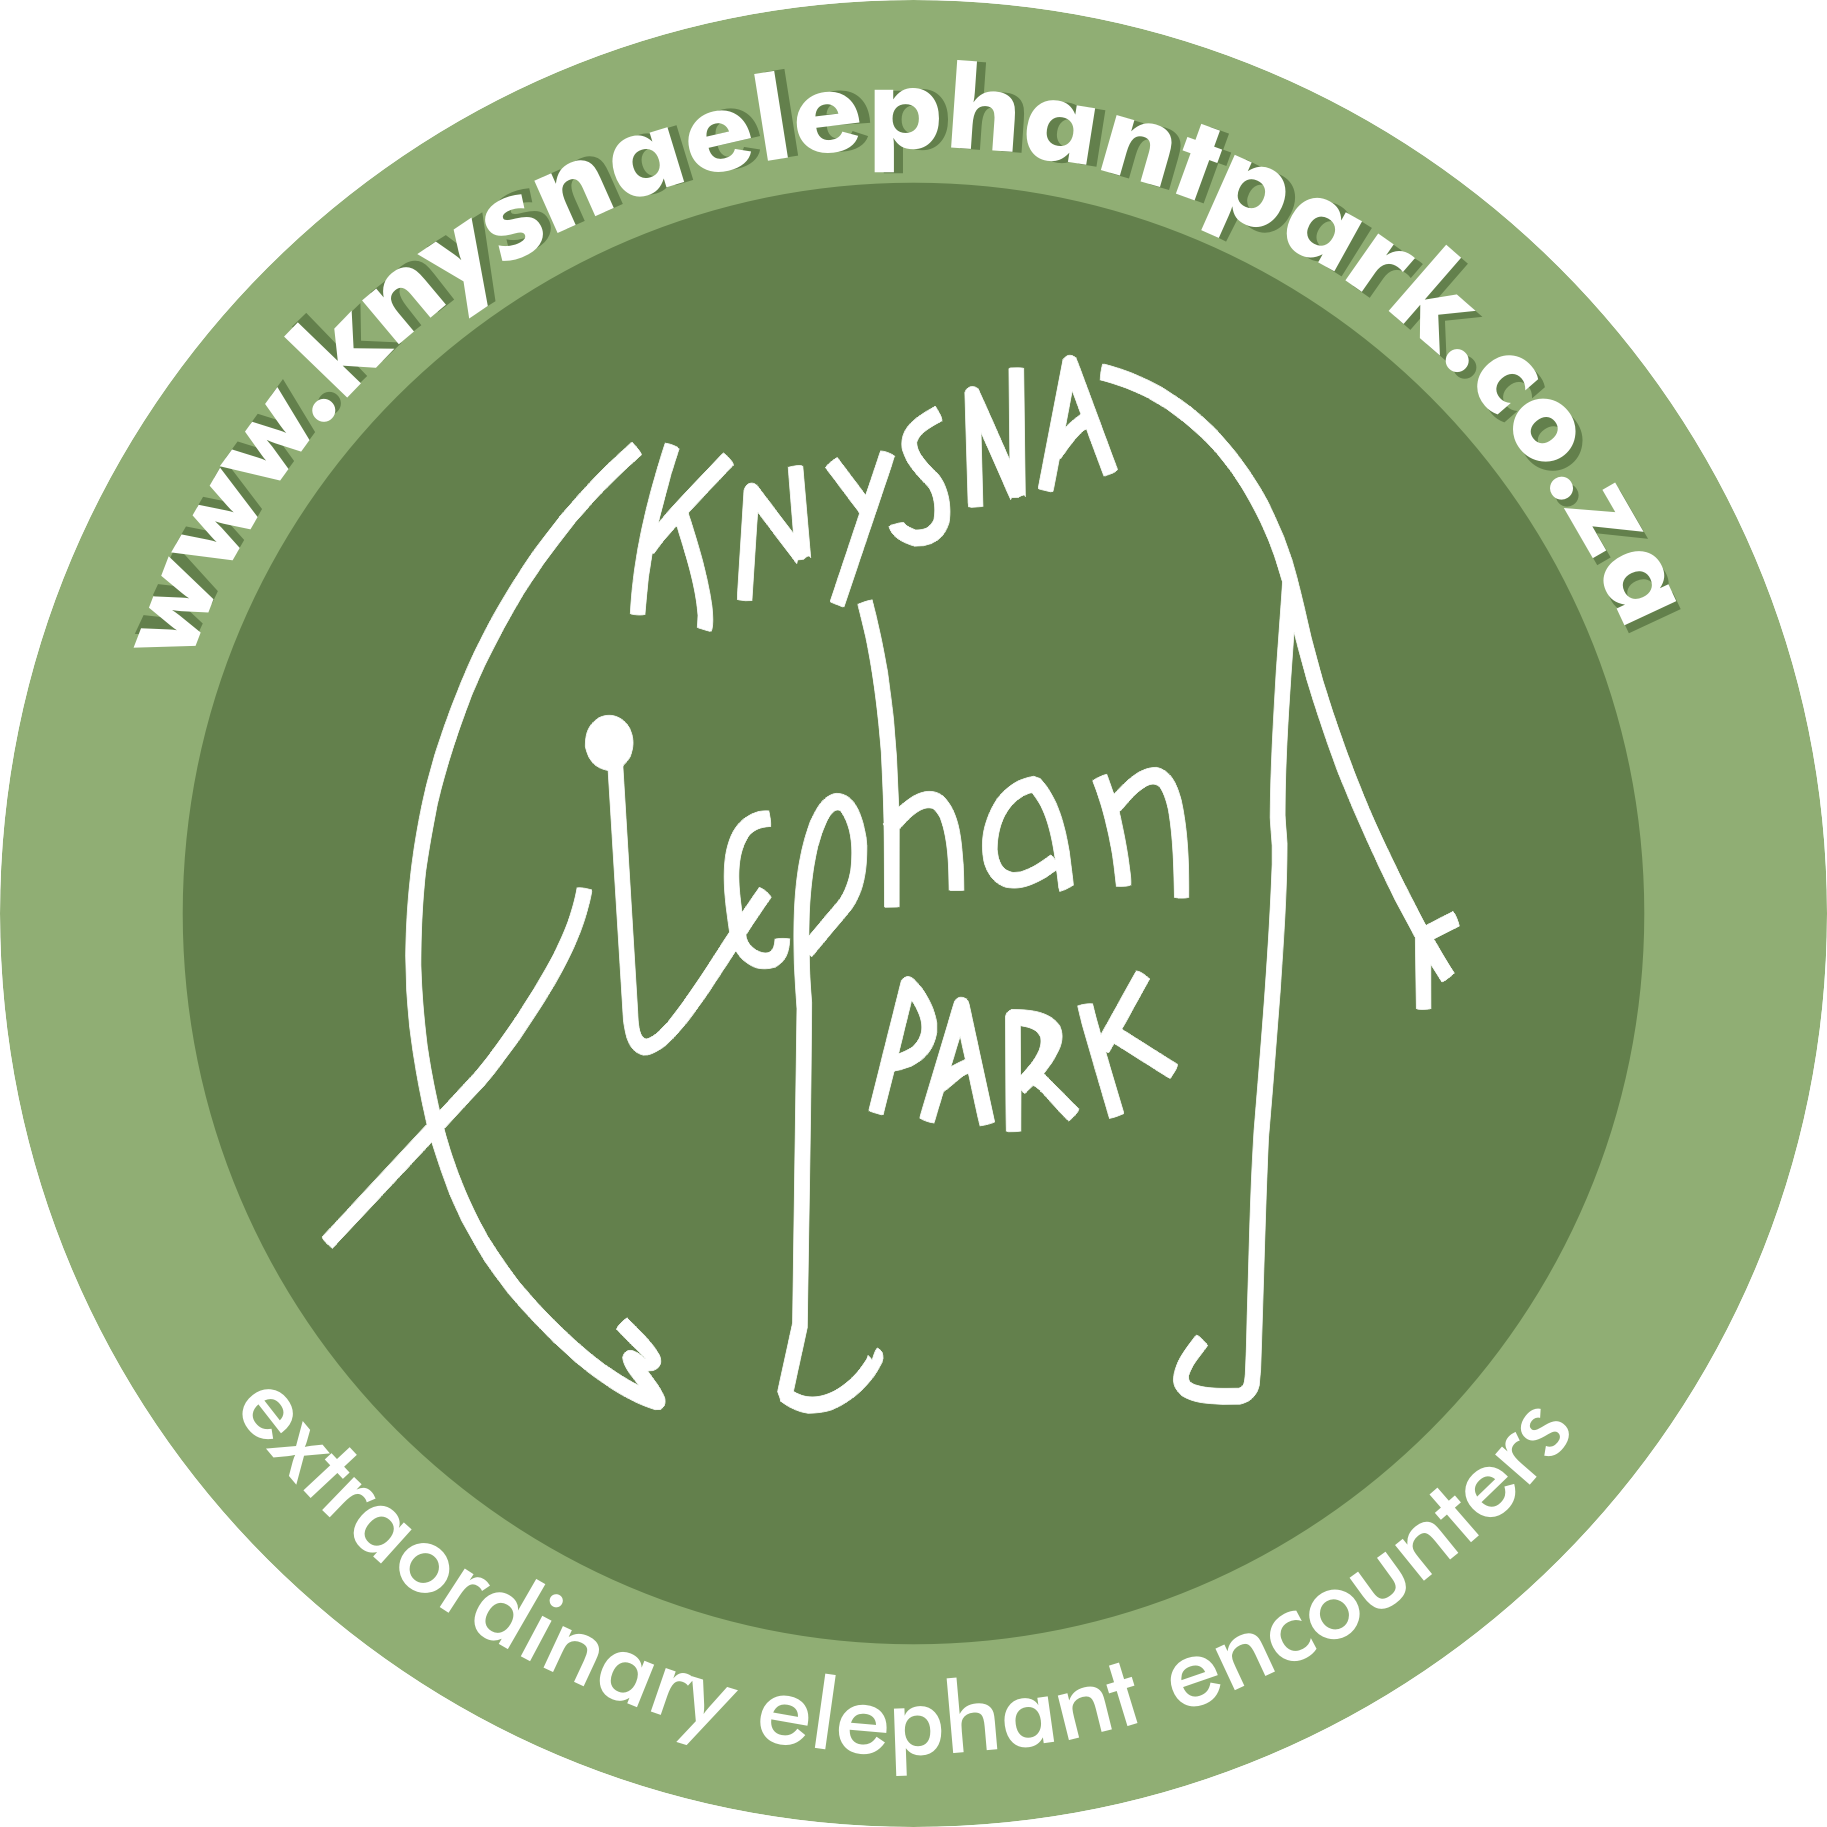 Elephant tweets from Knysna, South Africa. Occasional human tweets, too. But mostly elephant tweets.